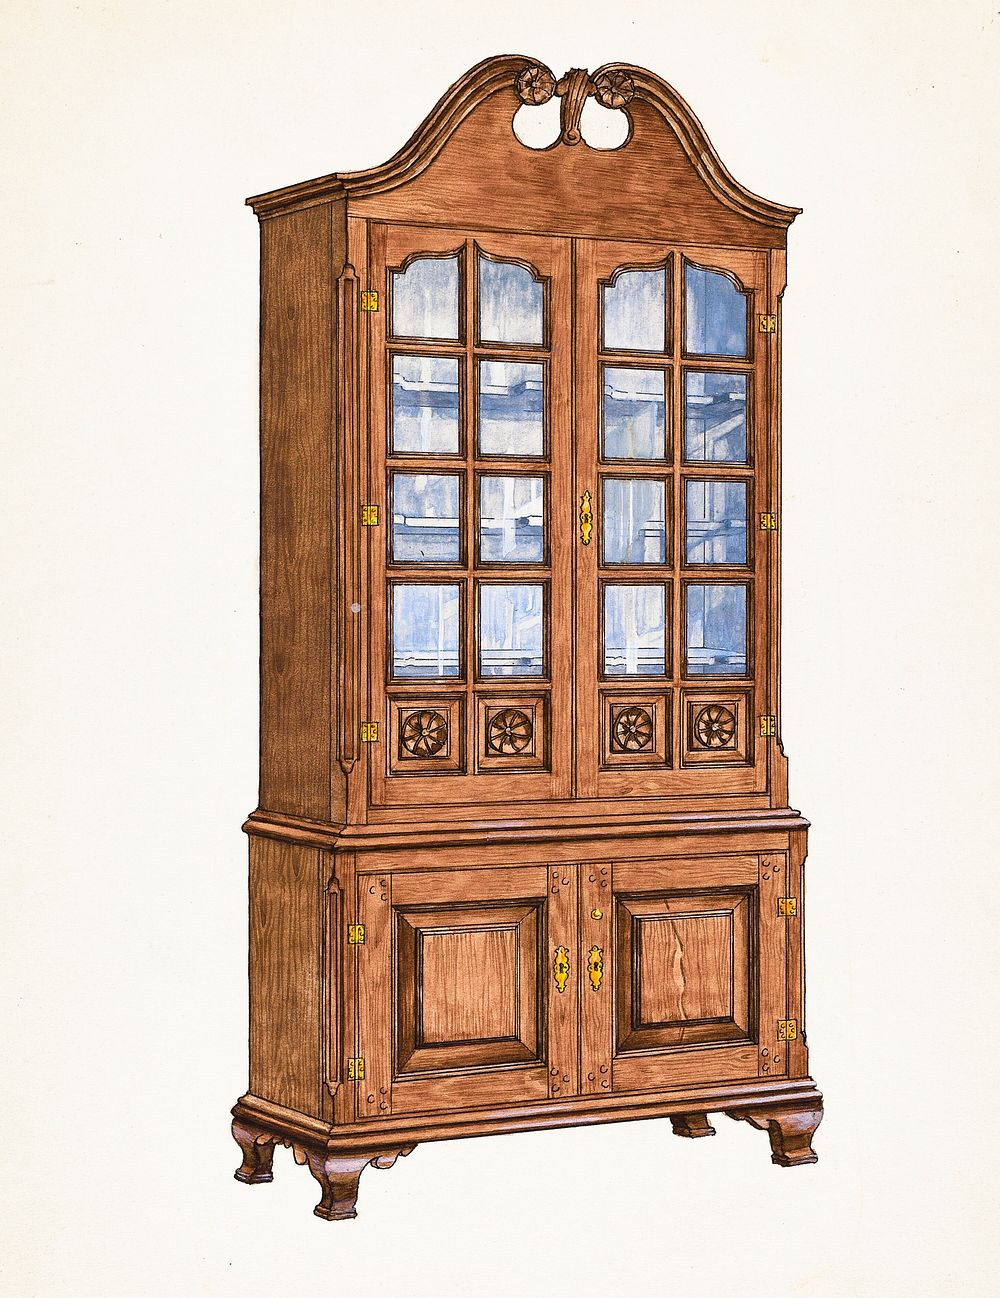 China Cupboard, c. 1939 by Edward A. Darby. Original from The National Gallery of Art. Digitally enhanced by rawpixel.